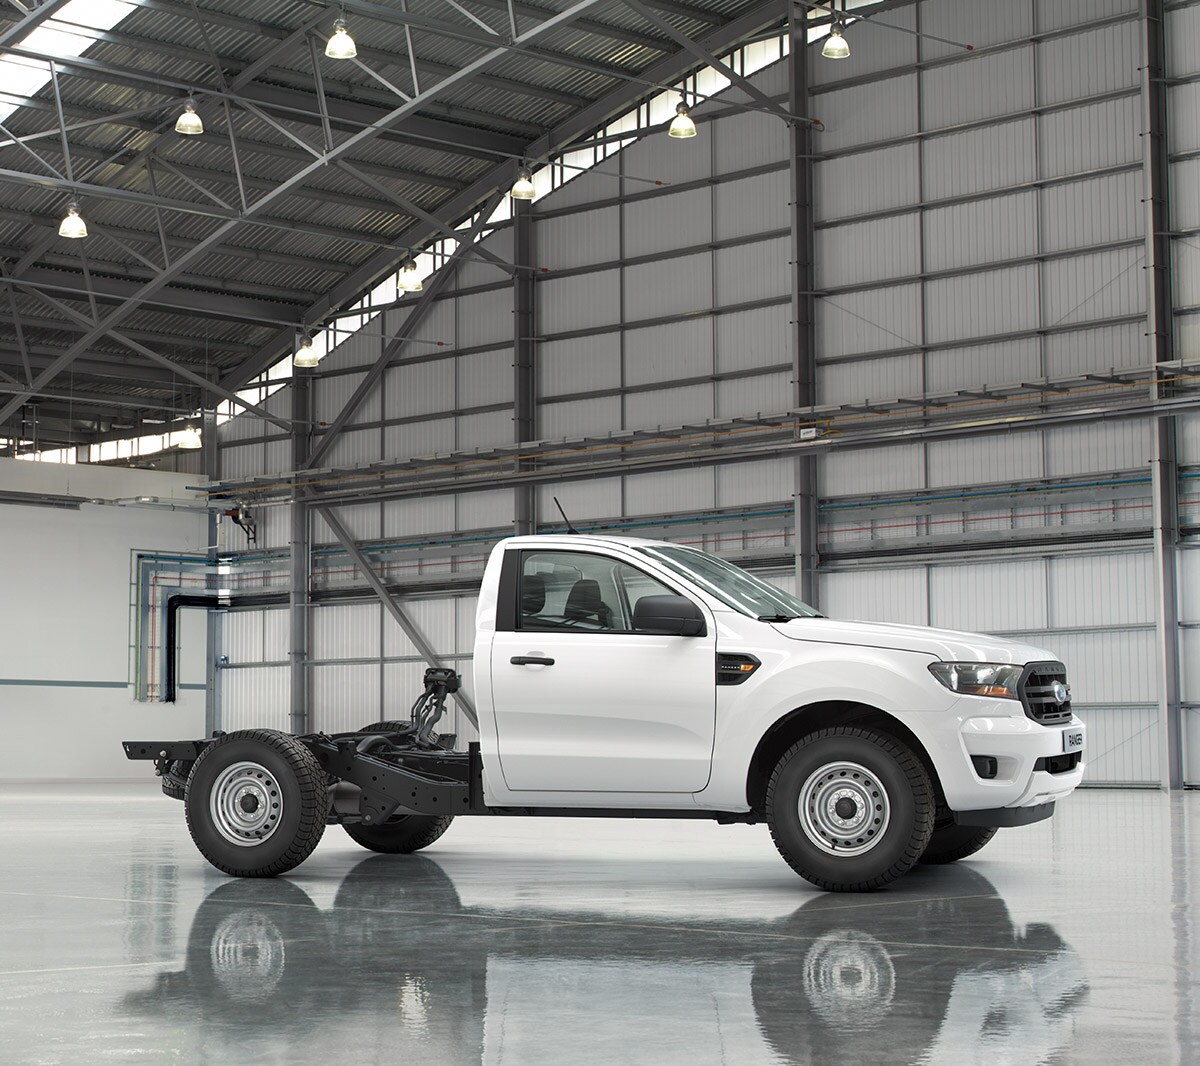 Ford Ranger Chassis Cab in a factory hall